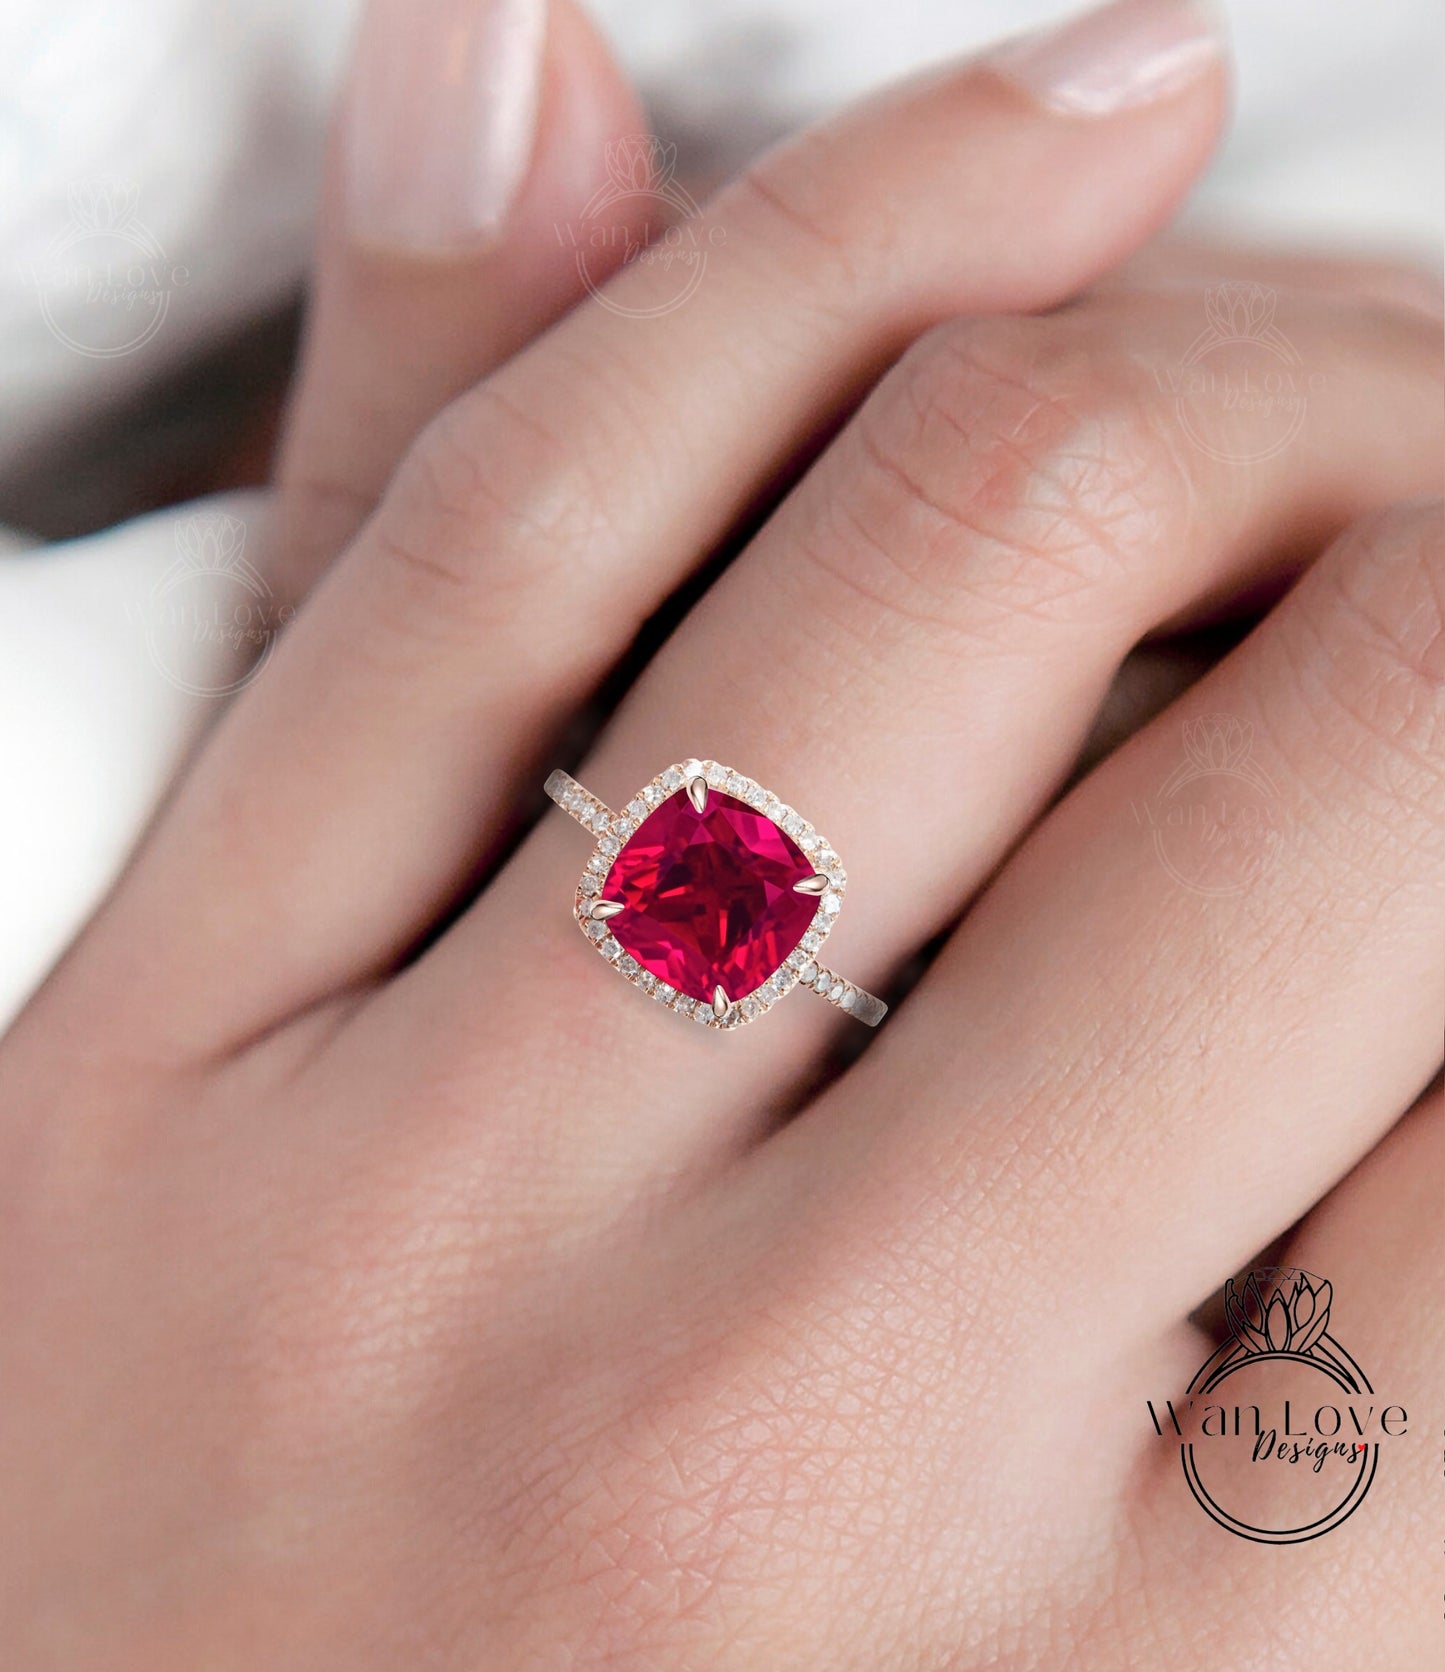 Cushion cut Ruby engagement ring vintage Art deco rose gold diamond halo ring Red Ruby birthstone Bridal wedding Anniversary promise ring